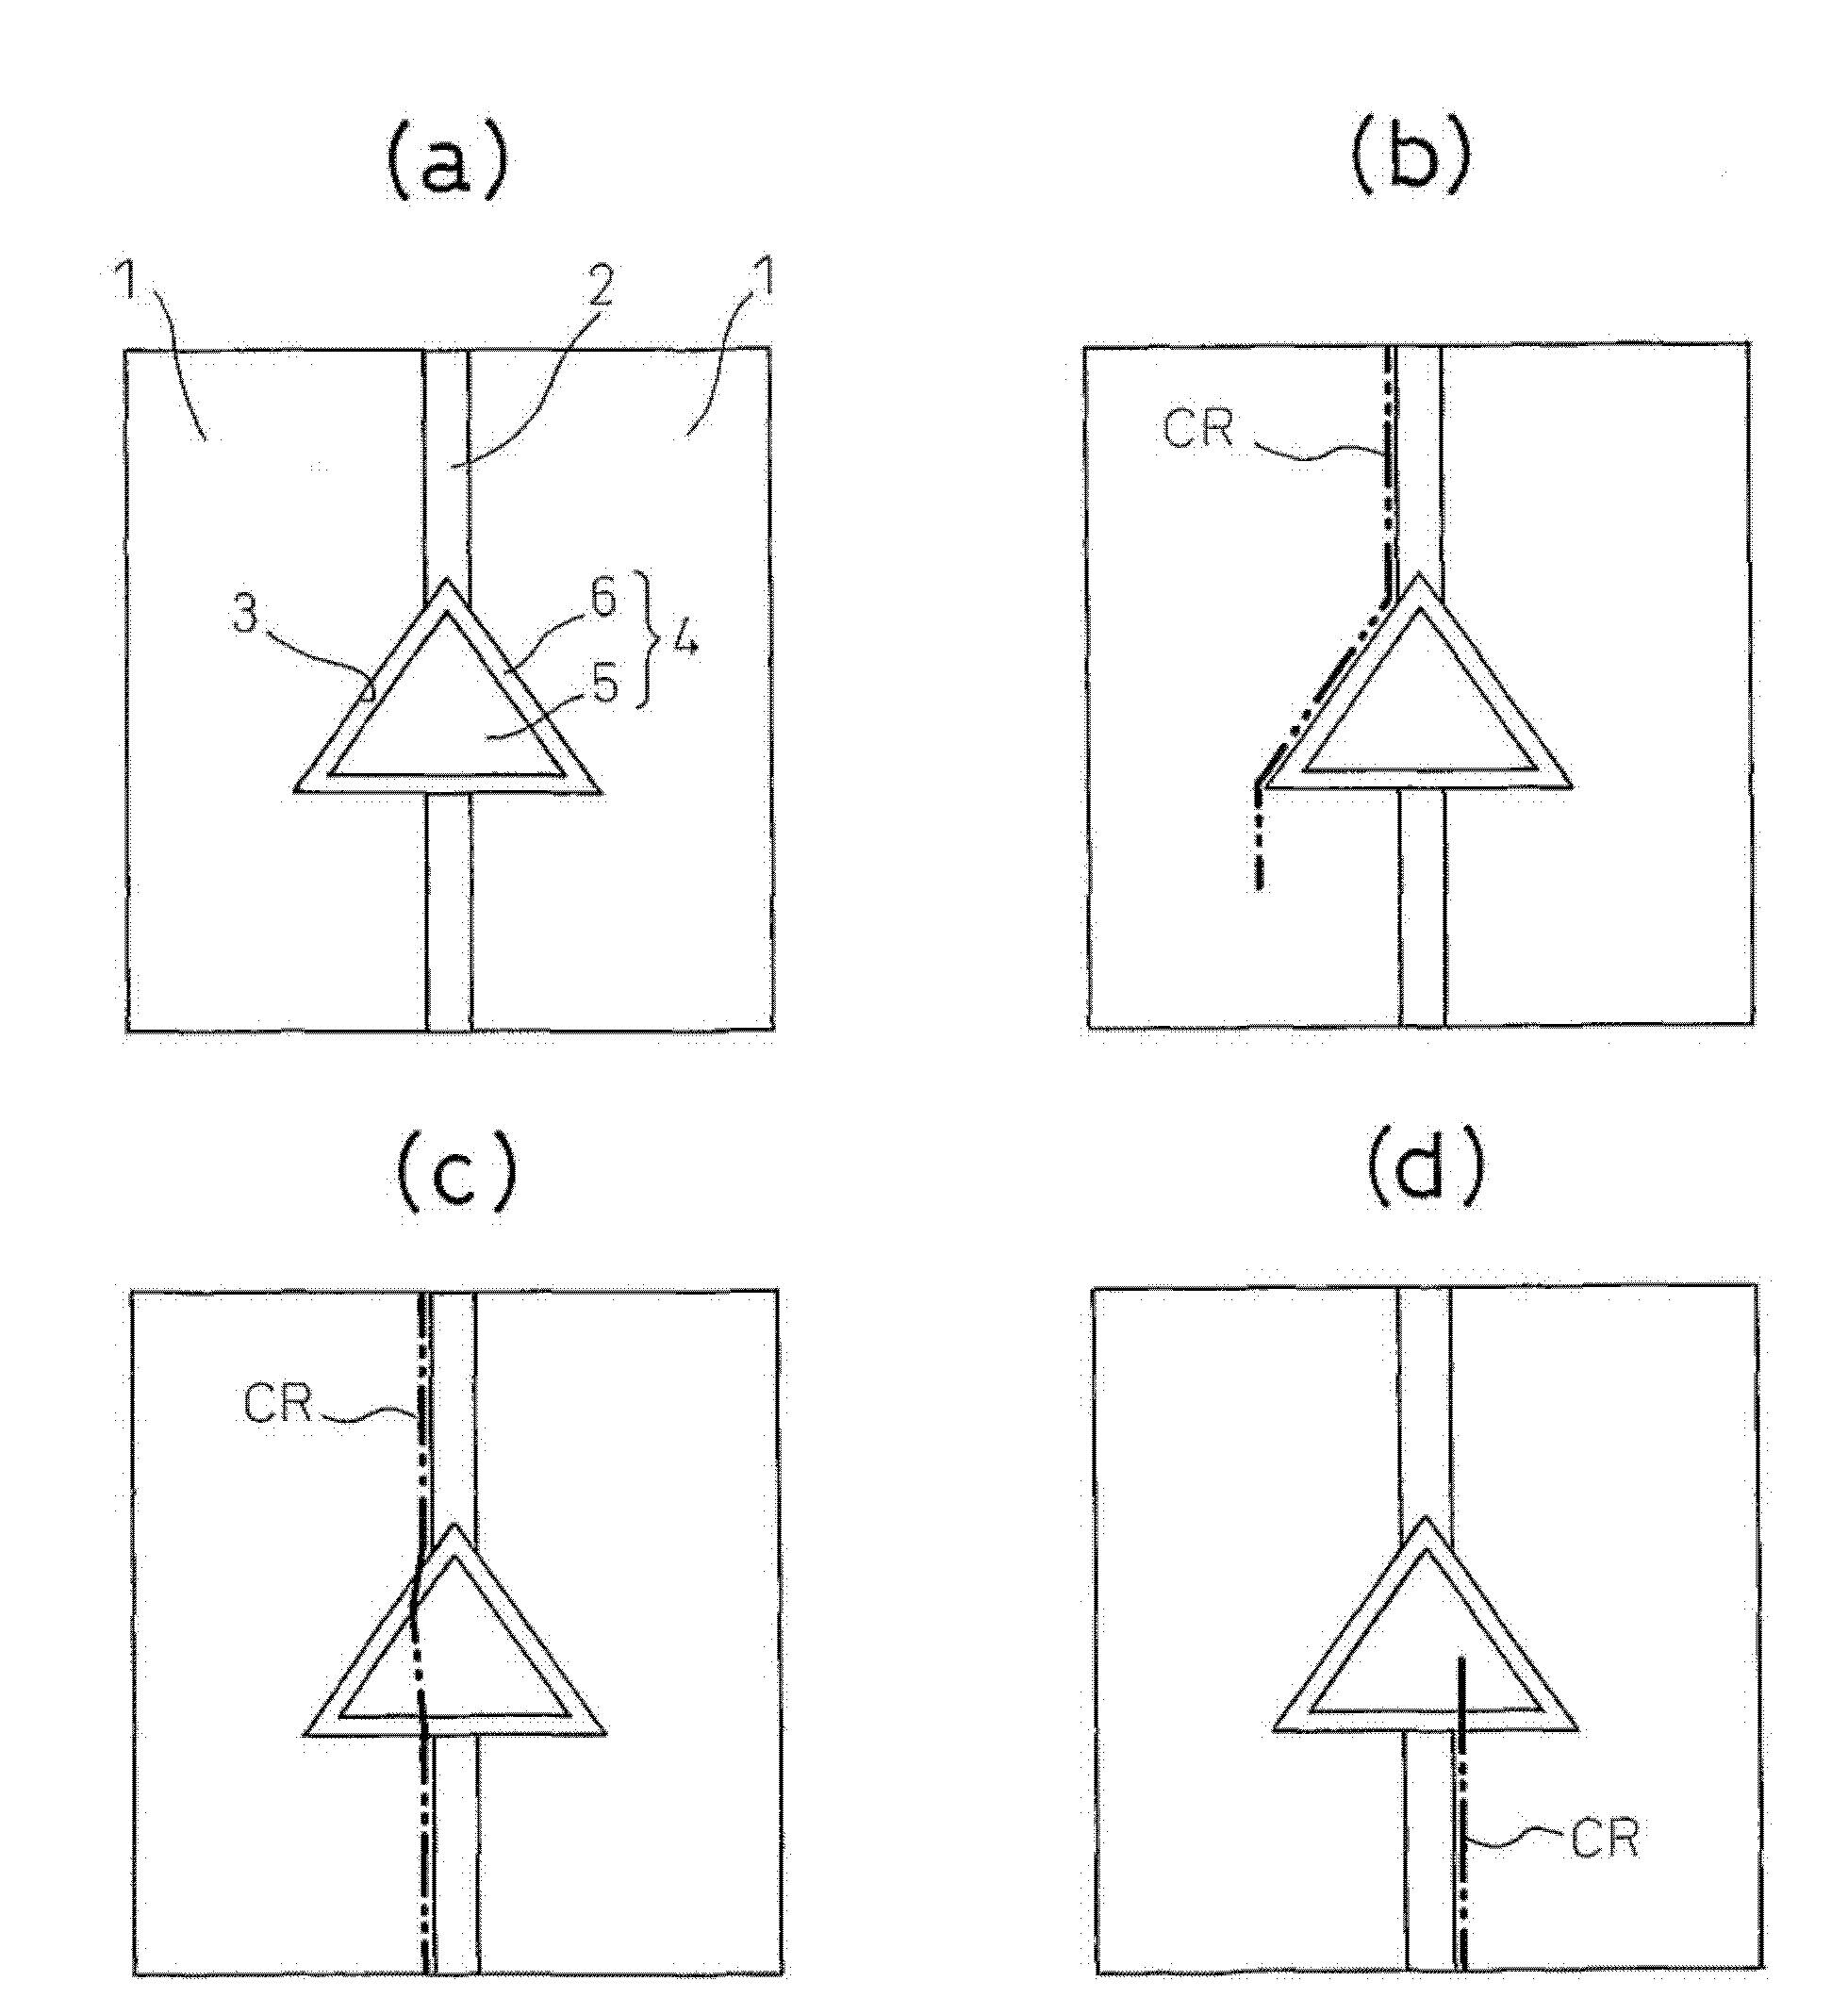 Welding structure with excellent resistance to brittle crack propagation